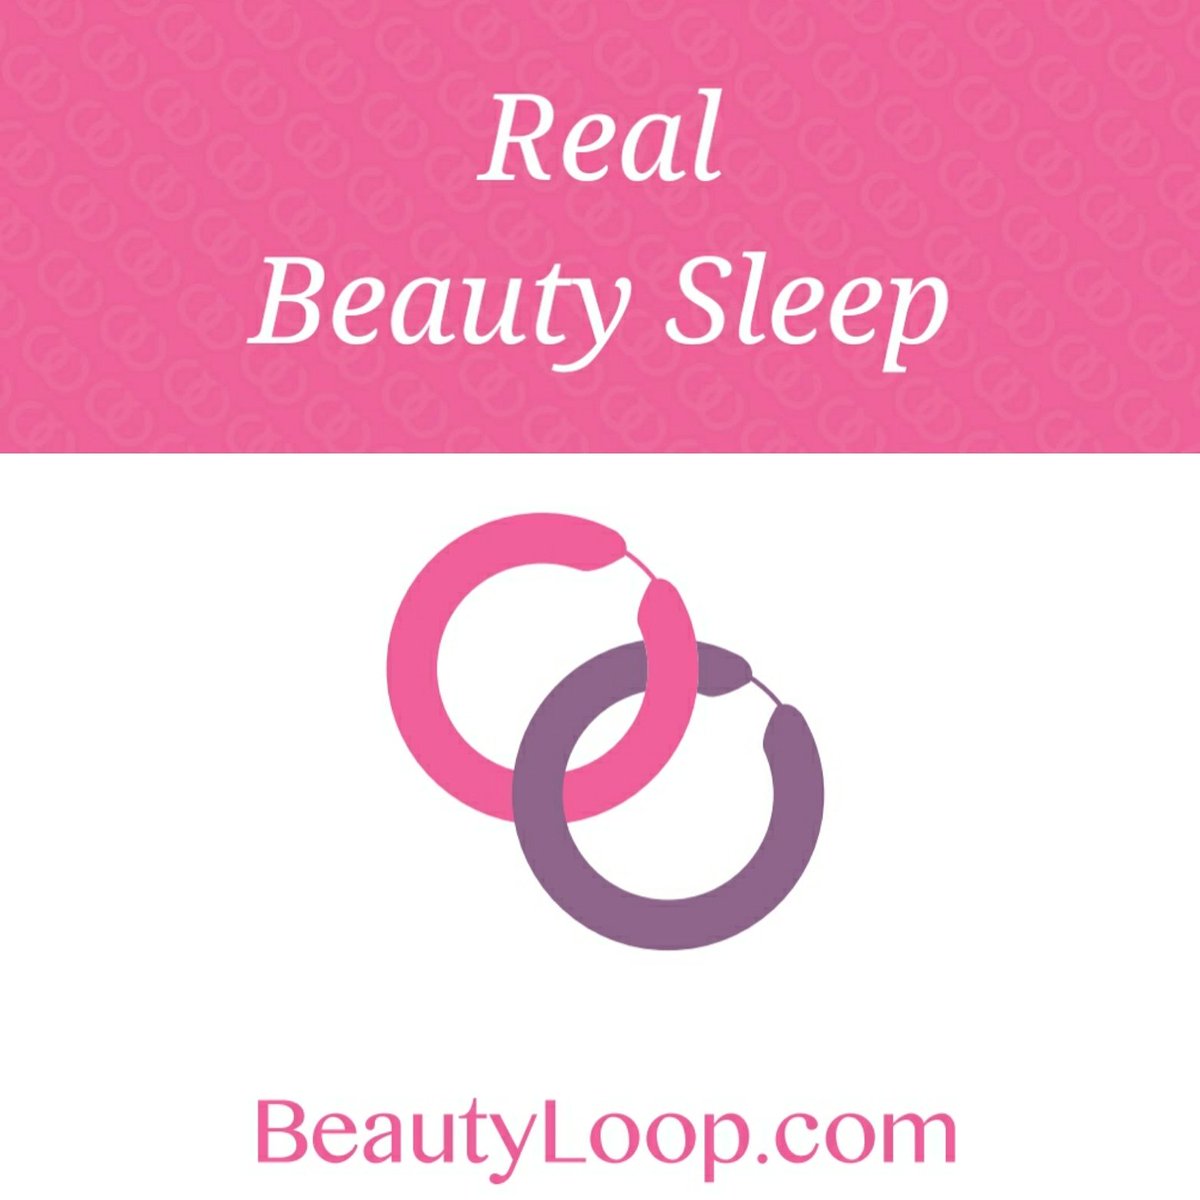 Getting #BeautySleep is so important to look our best. Keep your face #Beautiful for a lifetime with #MyBeautyLoop  #Antiwrinkle #antiaging #skinlove #beautypillow #skincare #antiwrinklepillow #beautybloggers #beautytools #beautyproducts #facialfiller #beautyloop #voluma #lashes